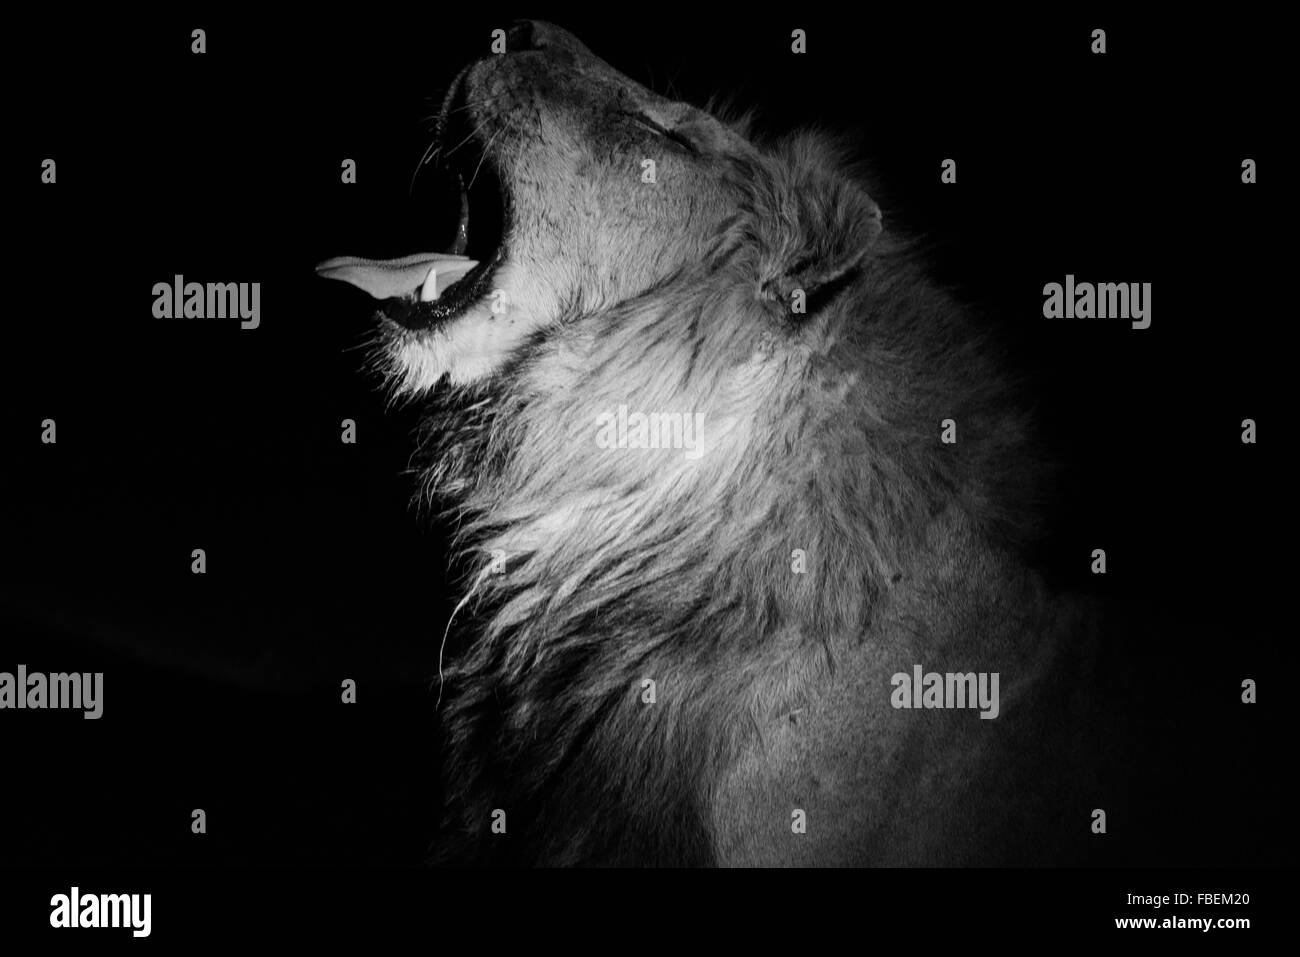 A male Lion yawning at night in black and white Stock Photo